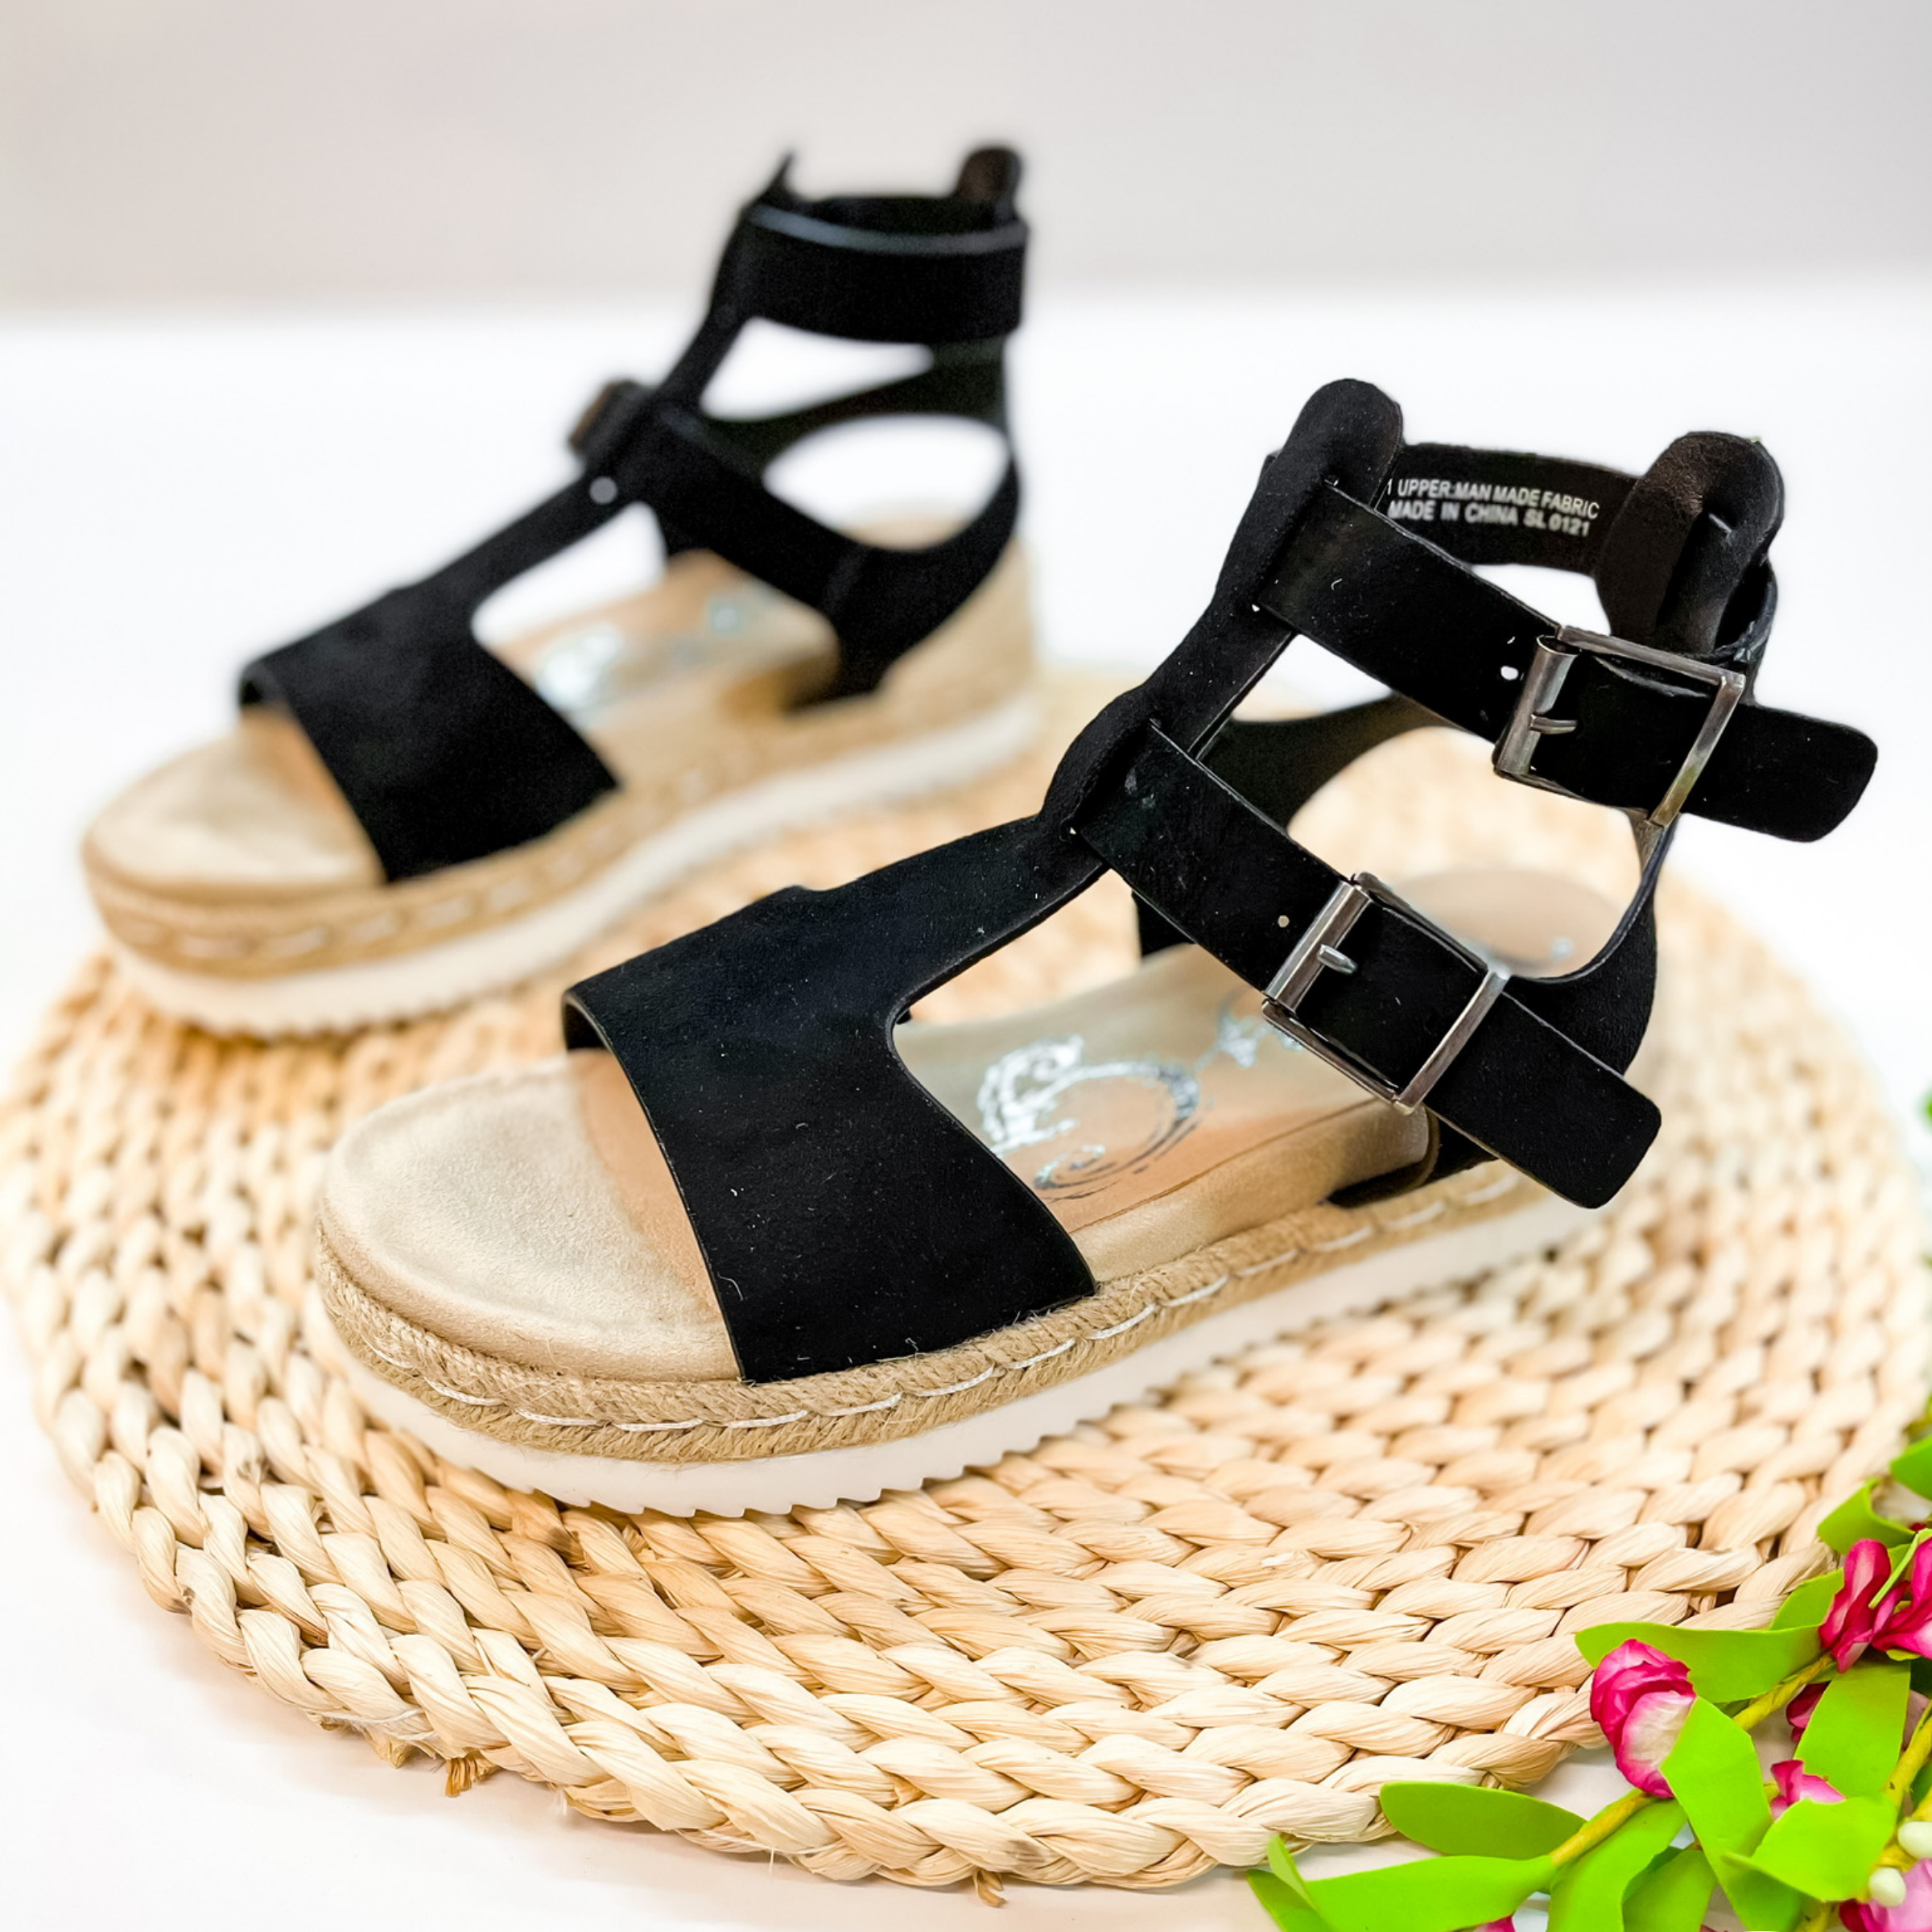 Very G | Coming In Hot Strappy Double Buckle Platform Sandals in Black Suede